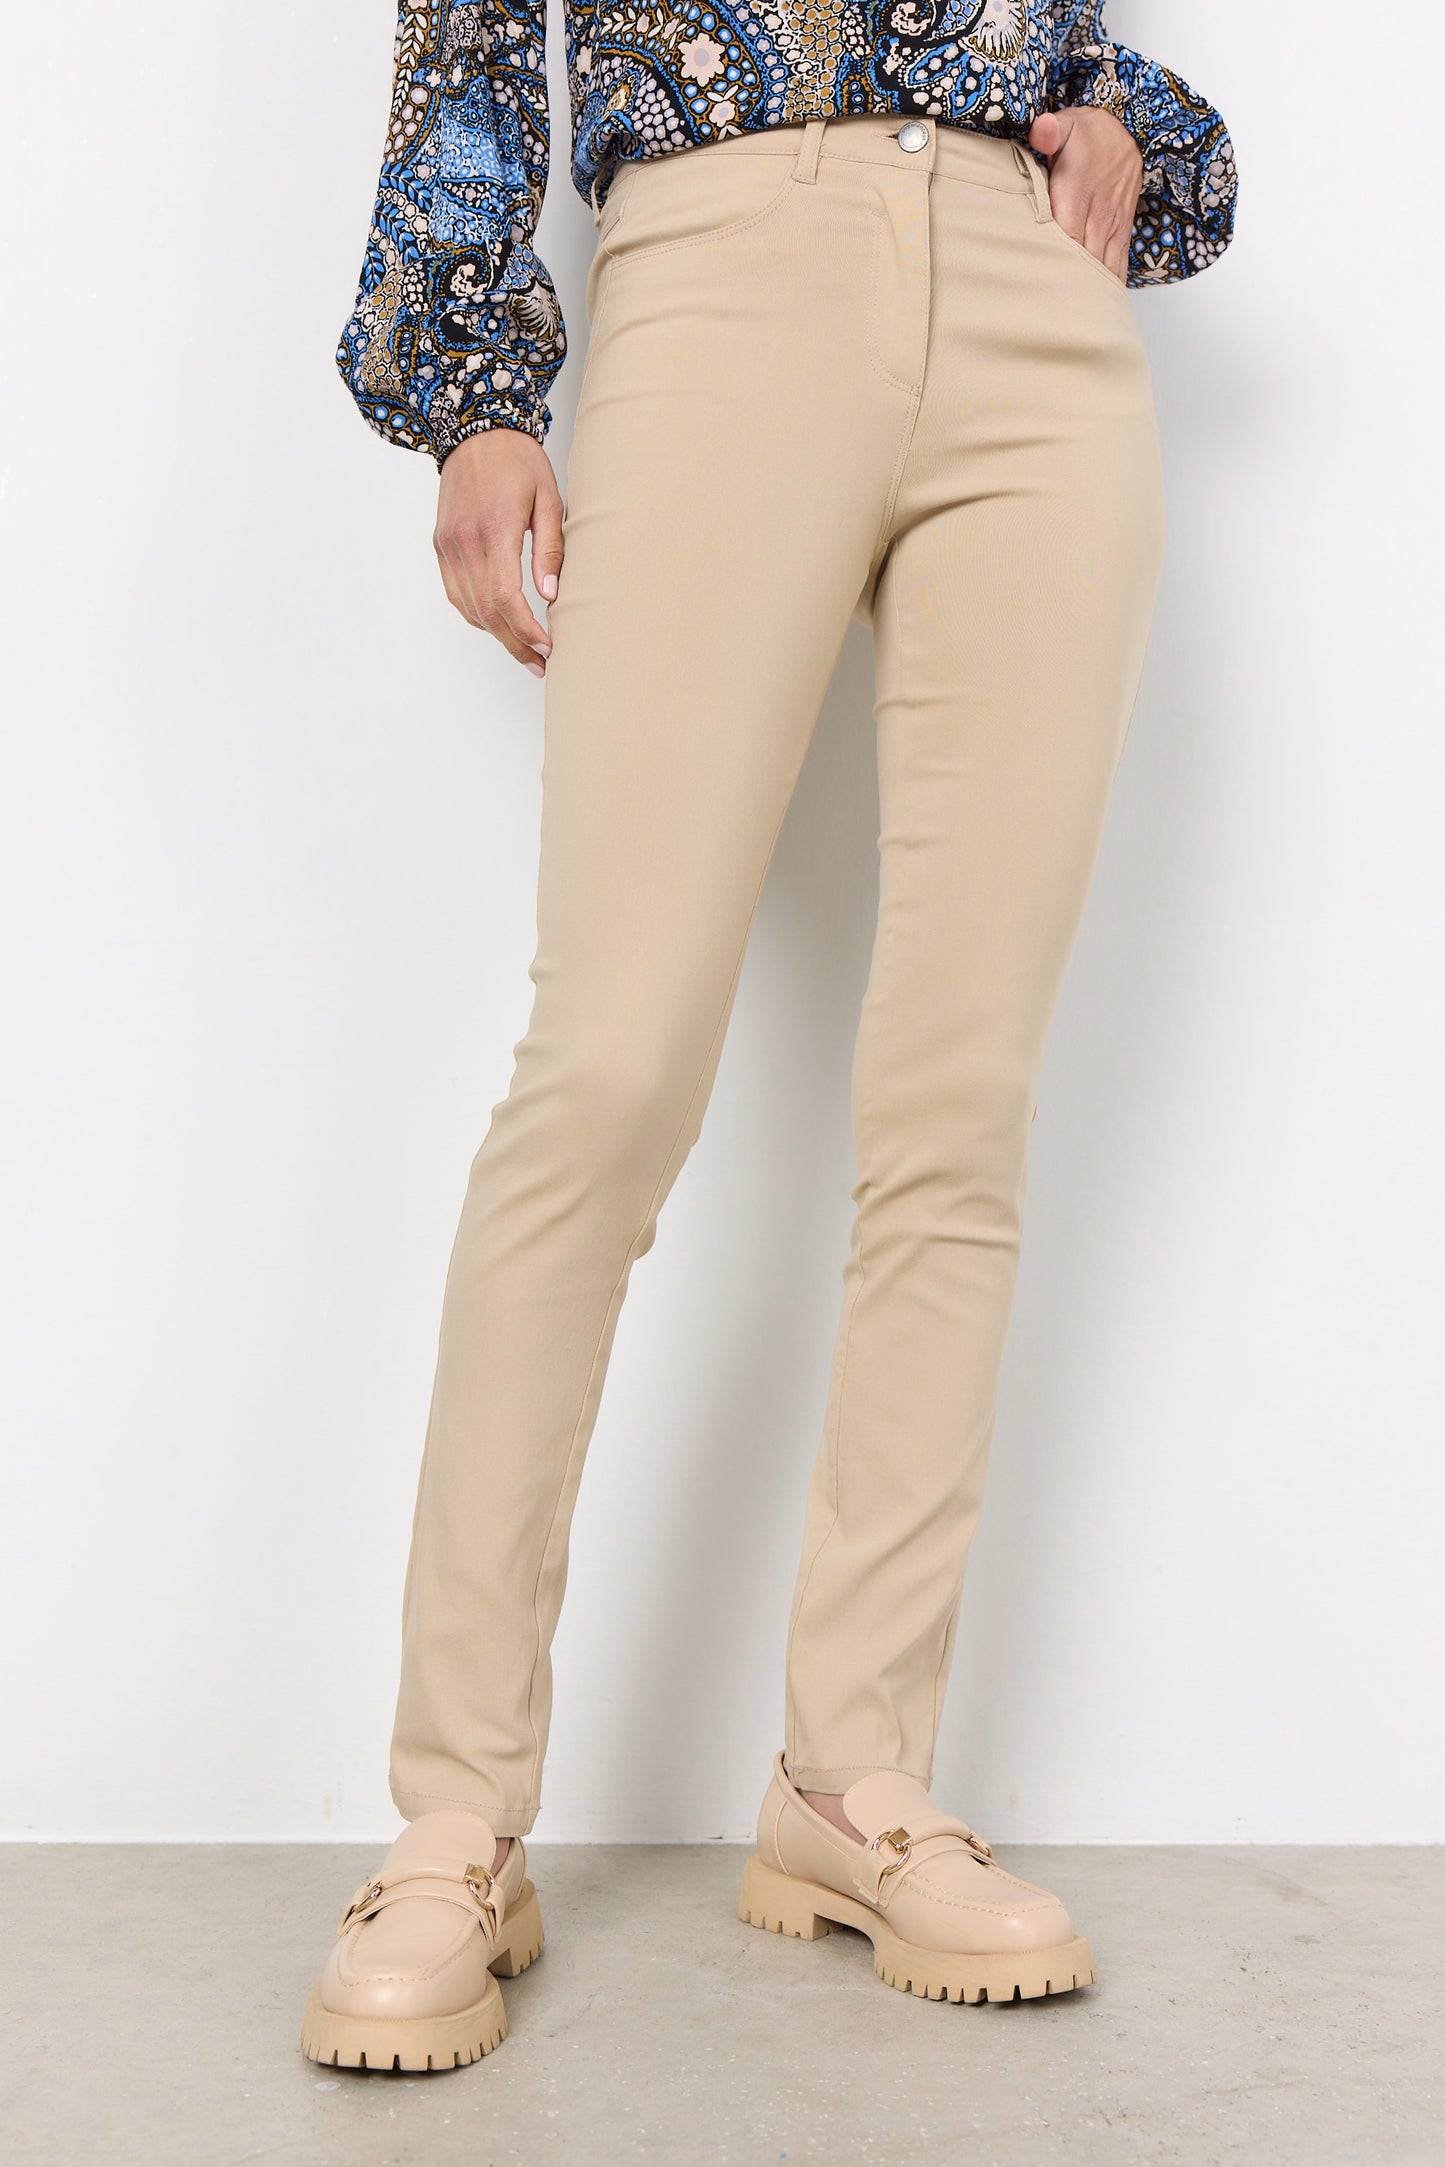 SOYA CONCEPT Classic Sand Lilly 1-B Slim Fit Jegging